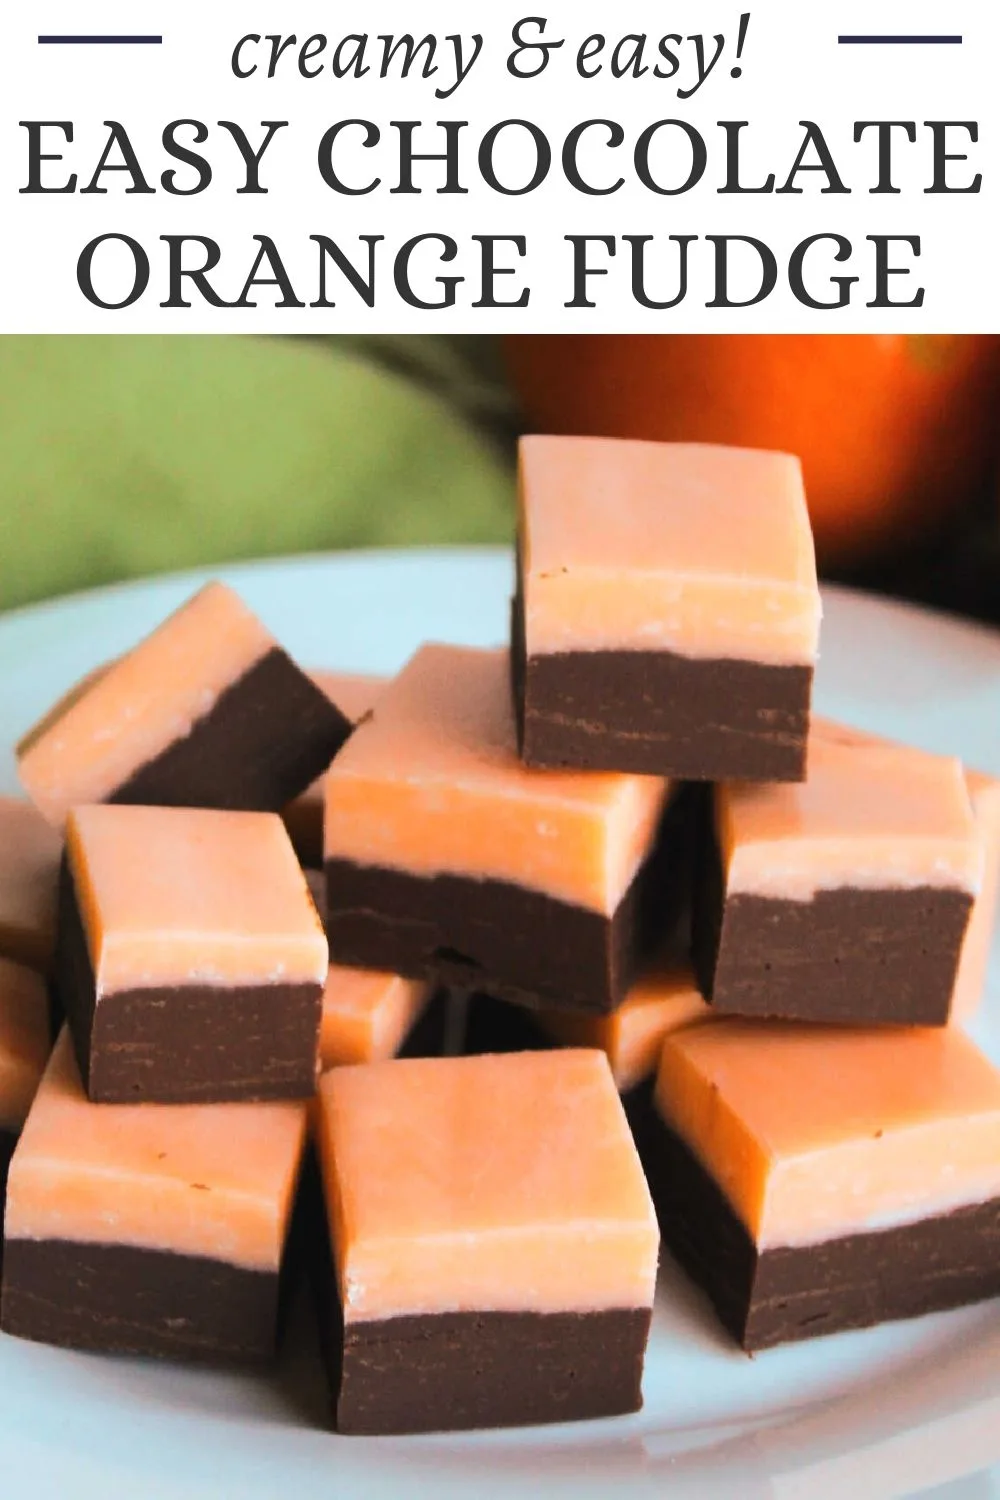 This easy chocolate orange fudge recipe only takes 5 ingredients and a few minutes to make. It is smooth, creamy and a perfect way to satisfy your sweet tooth.